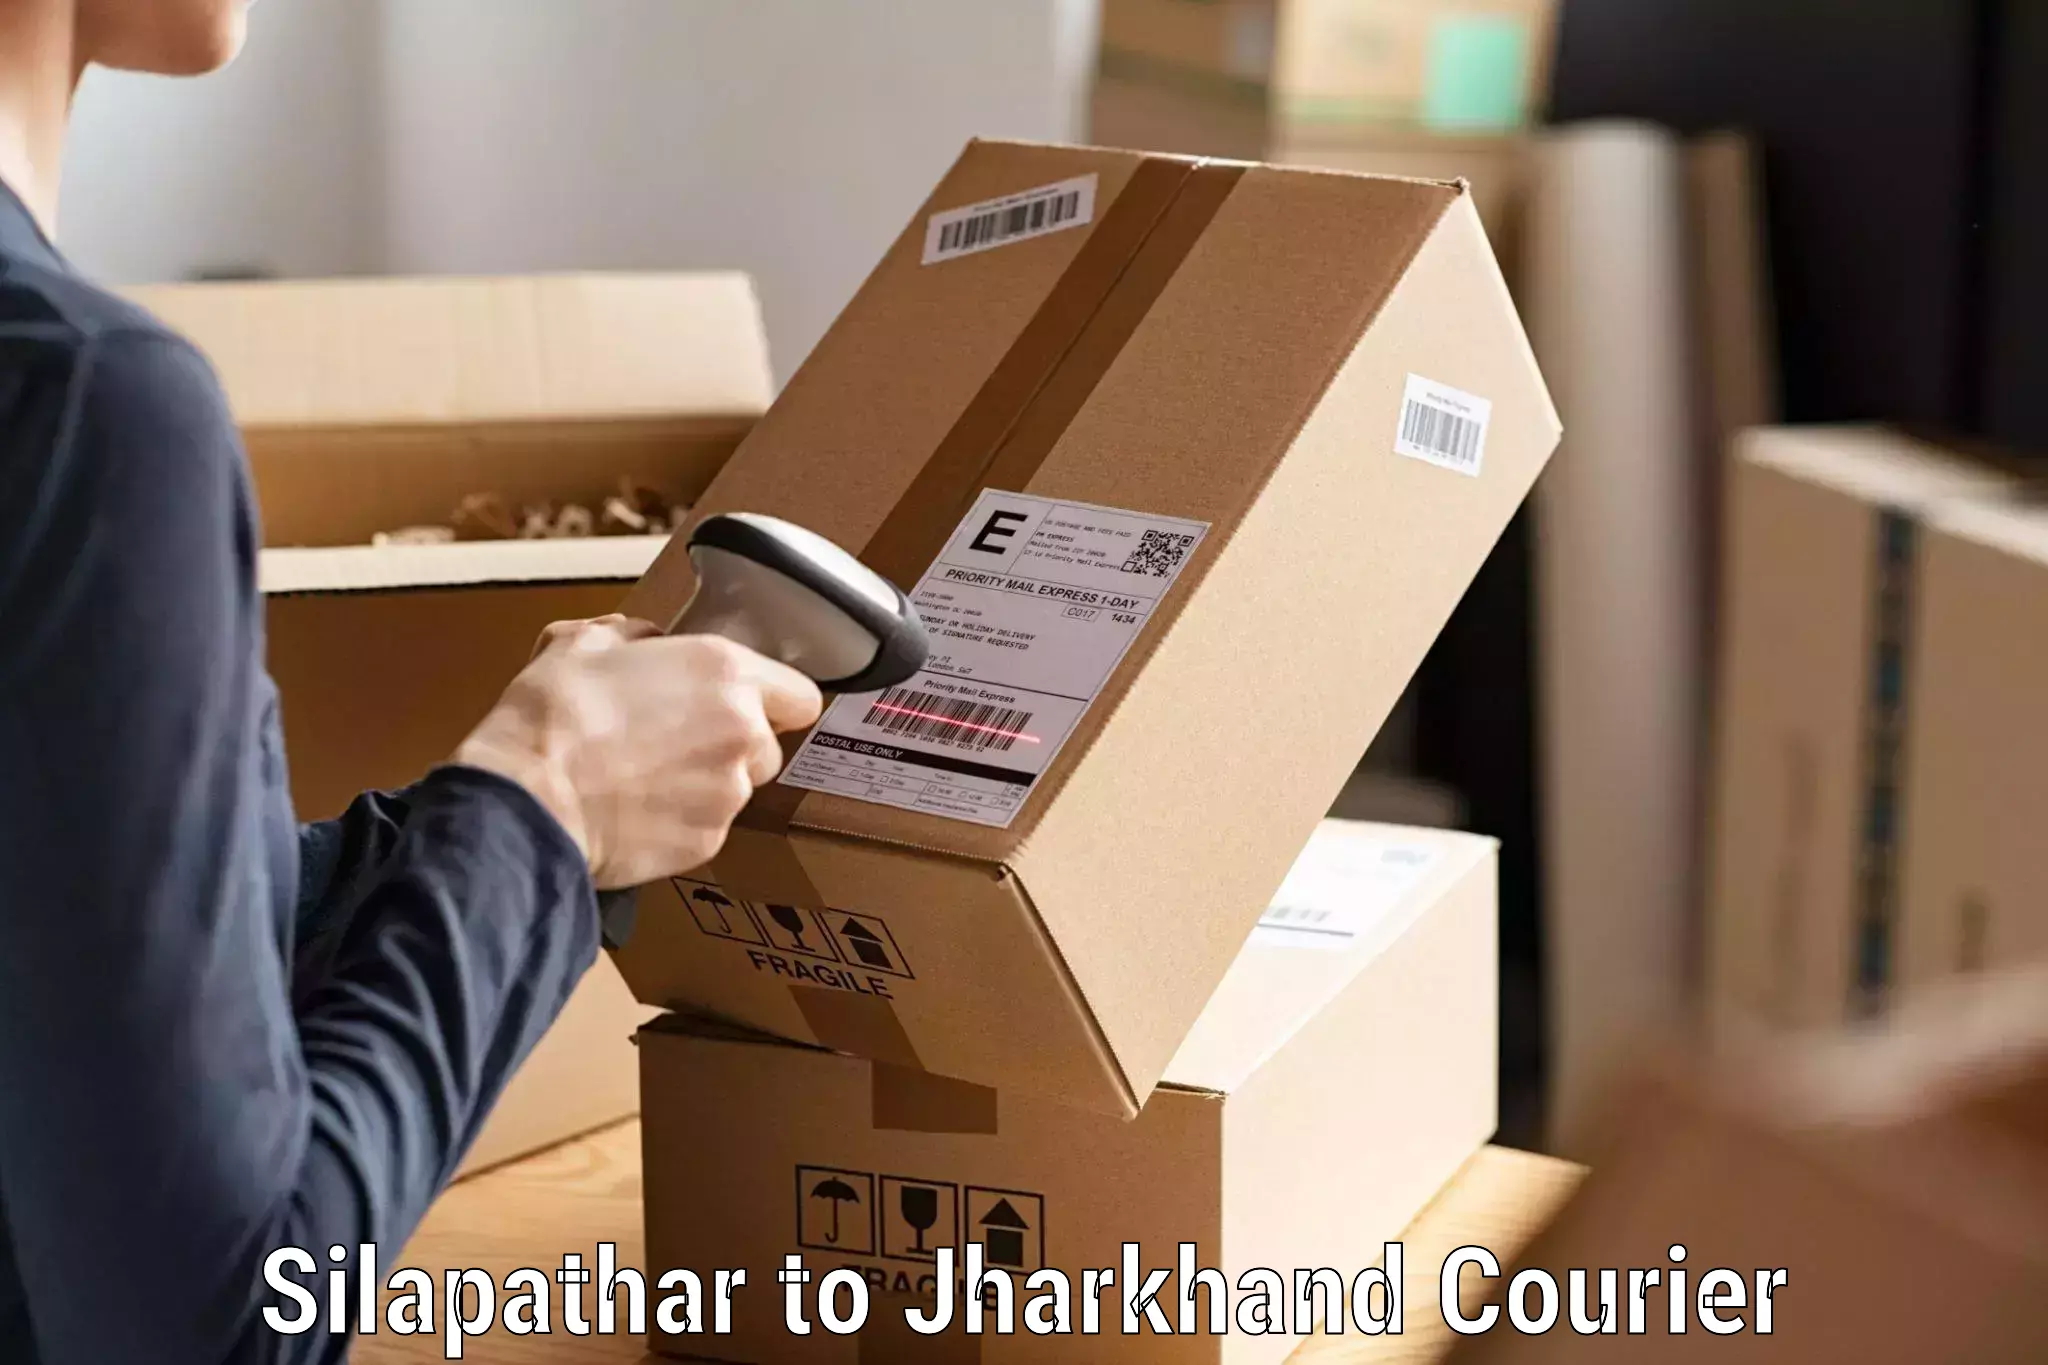 Door-to-door freight service in Silapathar to Godabar Chatra